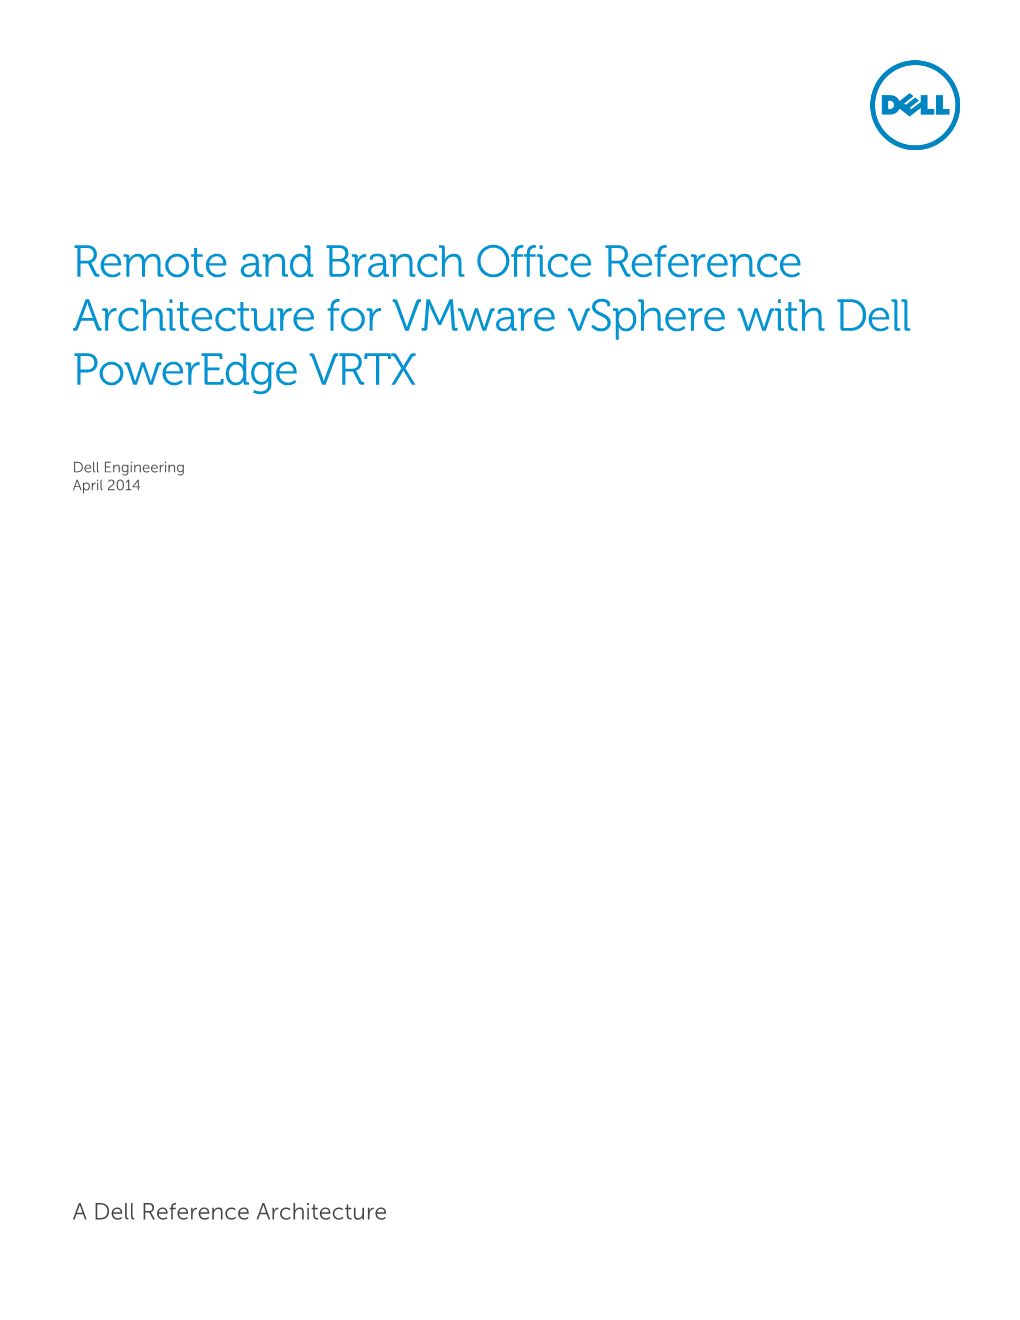 Remote and Branch Office Reference Architecture for Vmware Vsphere with Dell Poweredge VRTX